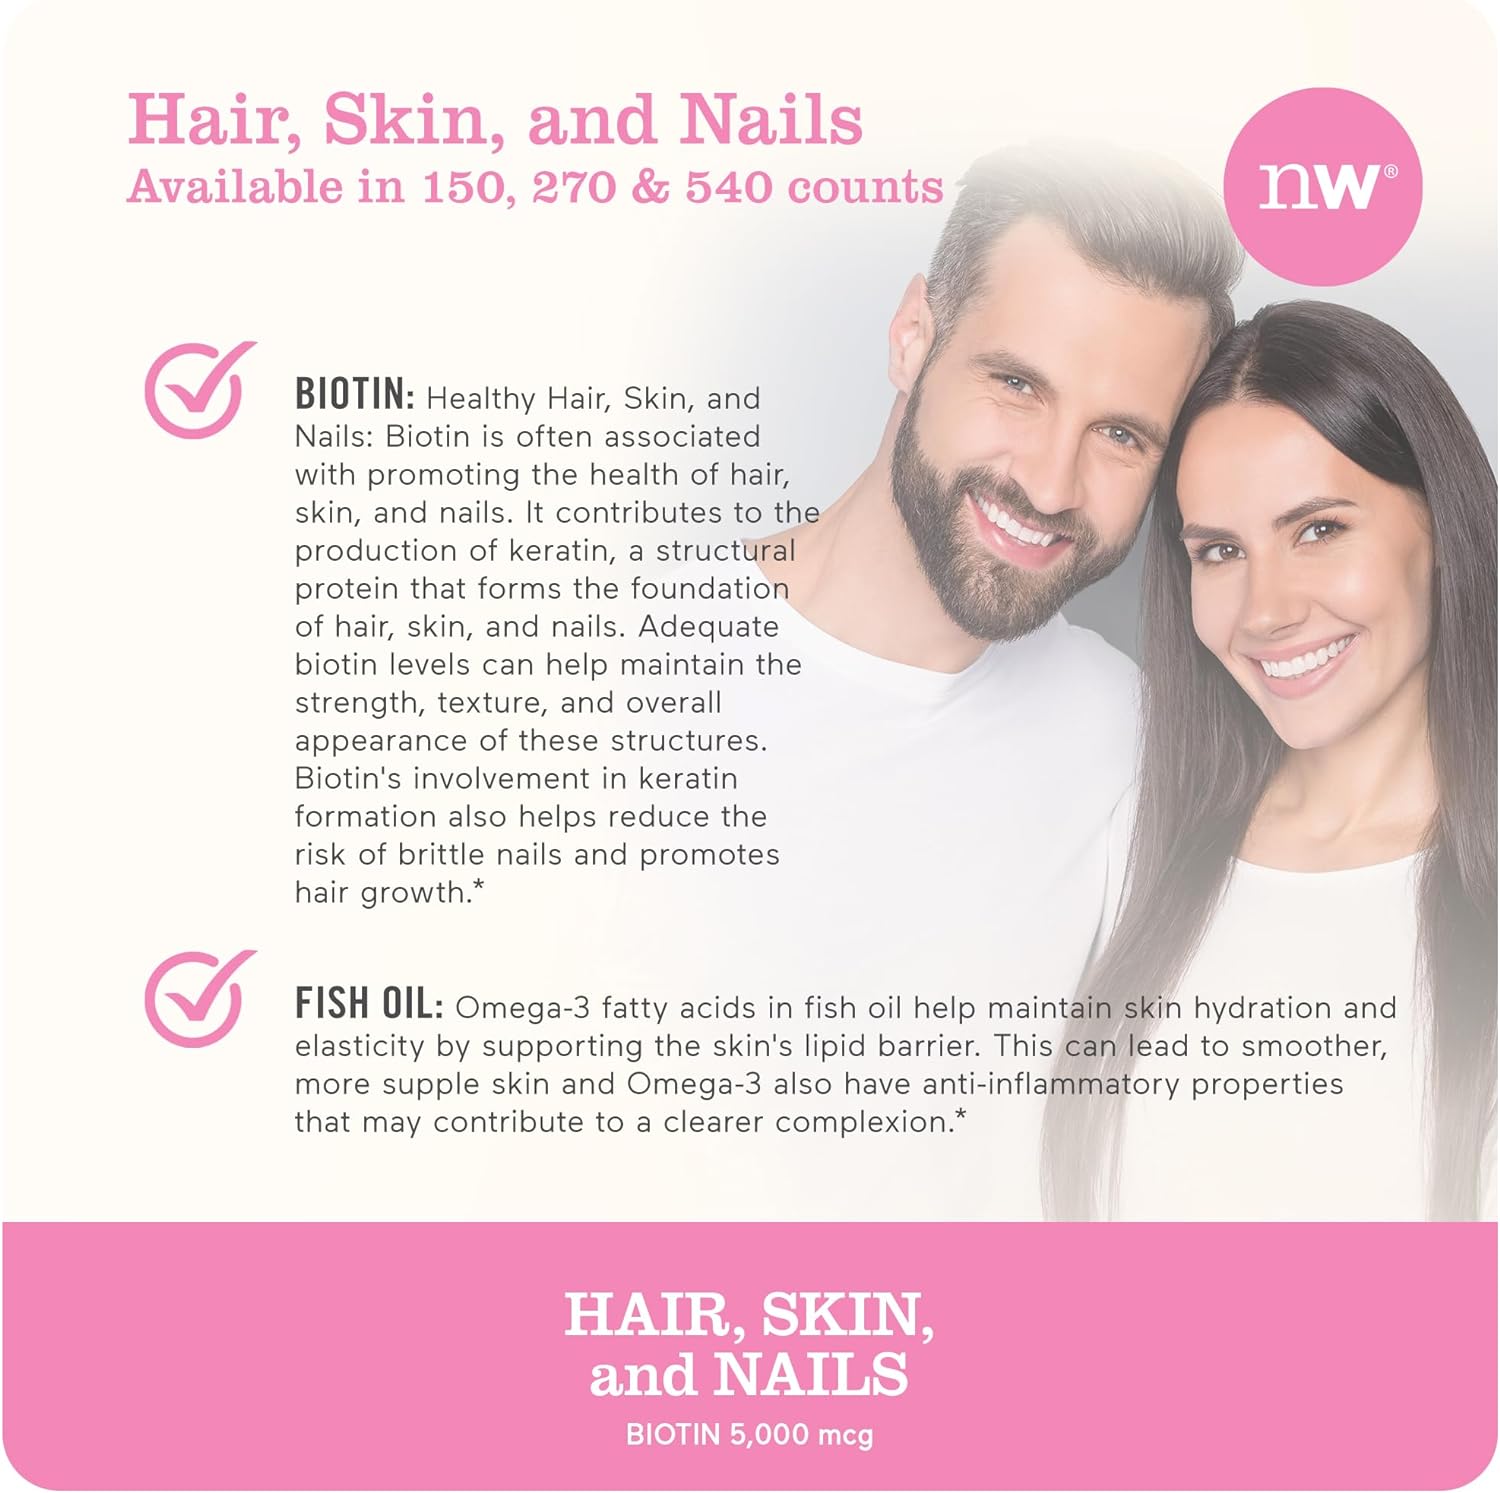 NatureWise Hair, Skin, and Nails Biotin 5,000 mcg with Hyaluronic Acid